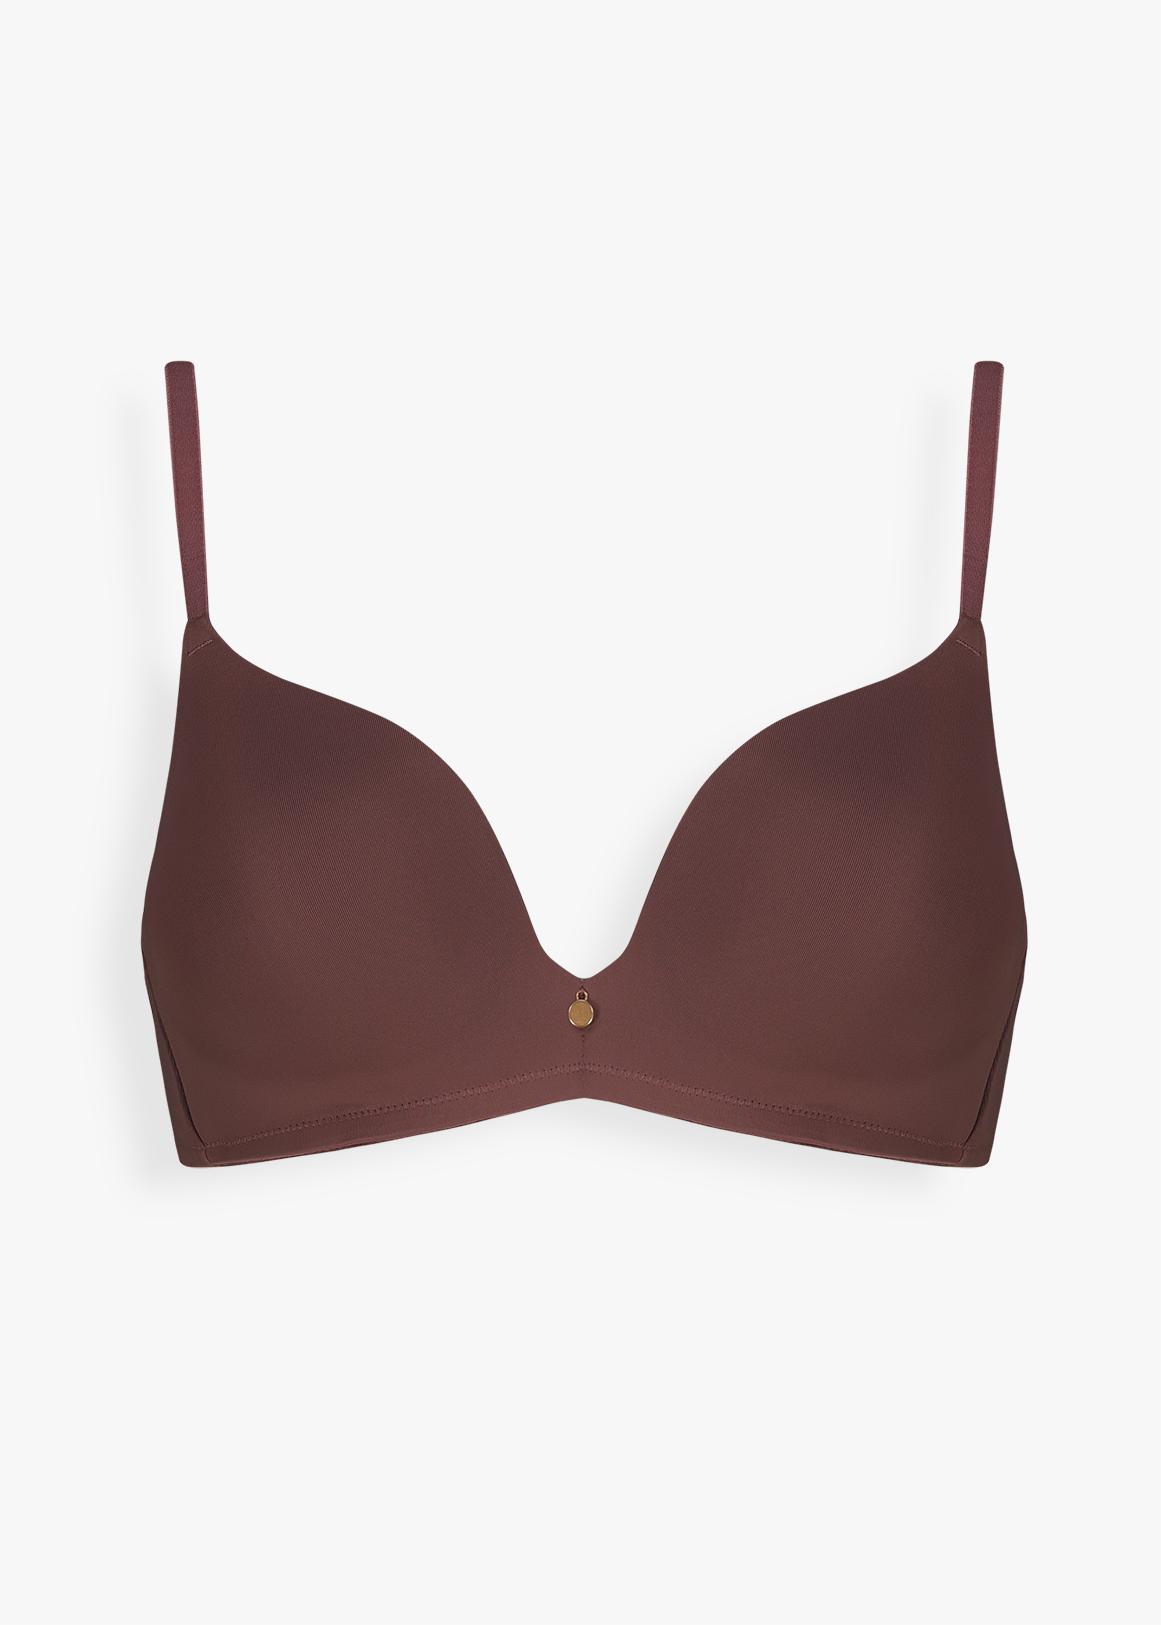 How do Plunge Bras Compare From Brand to Brand?